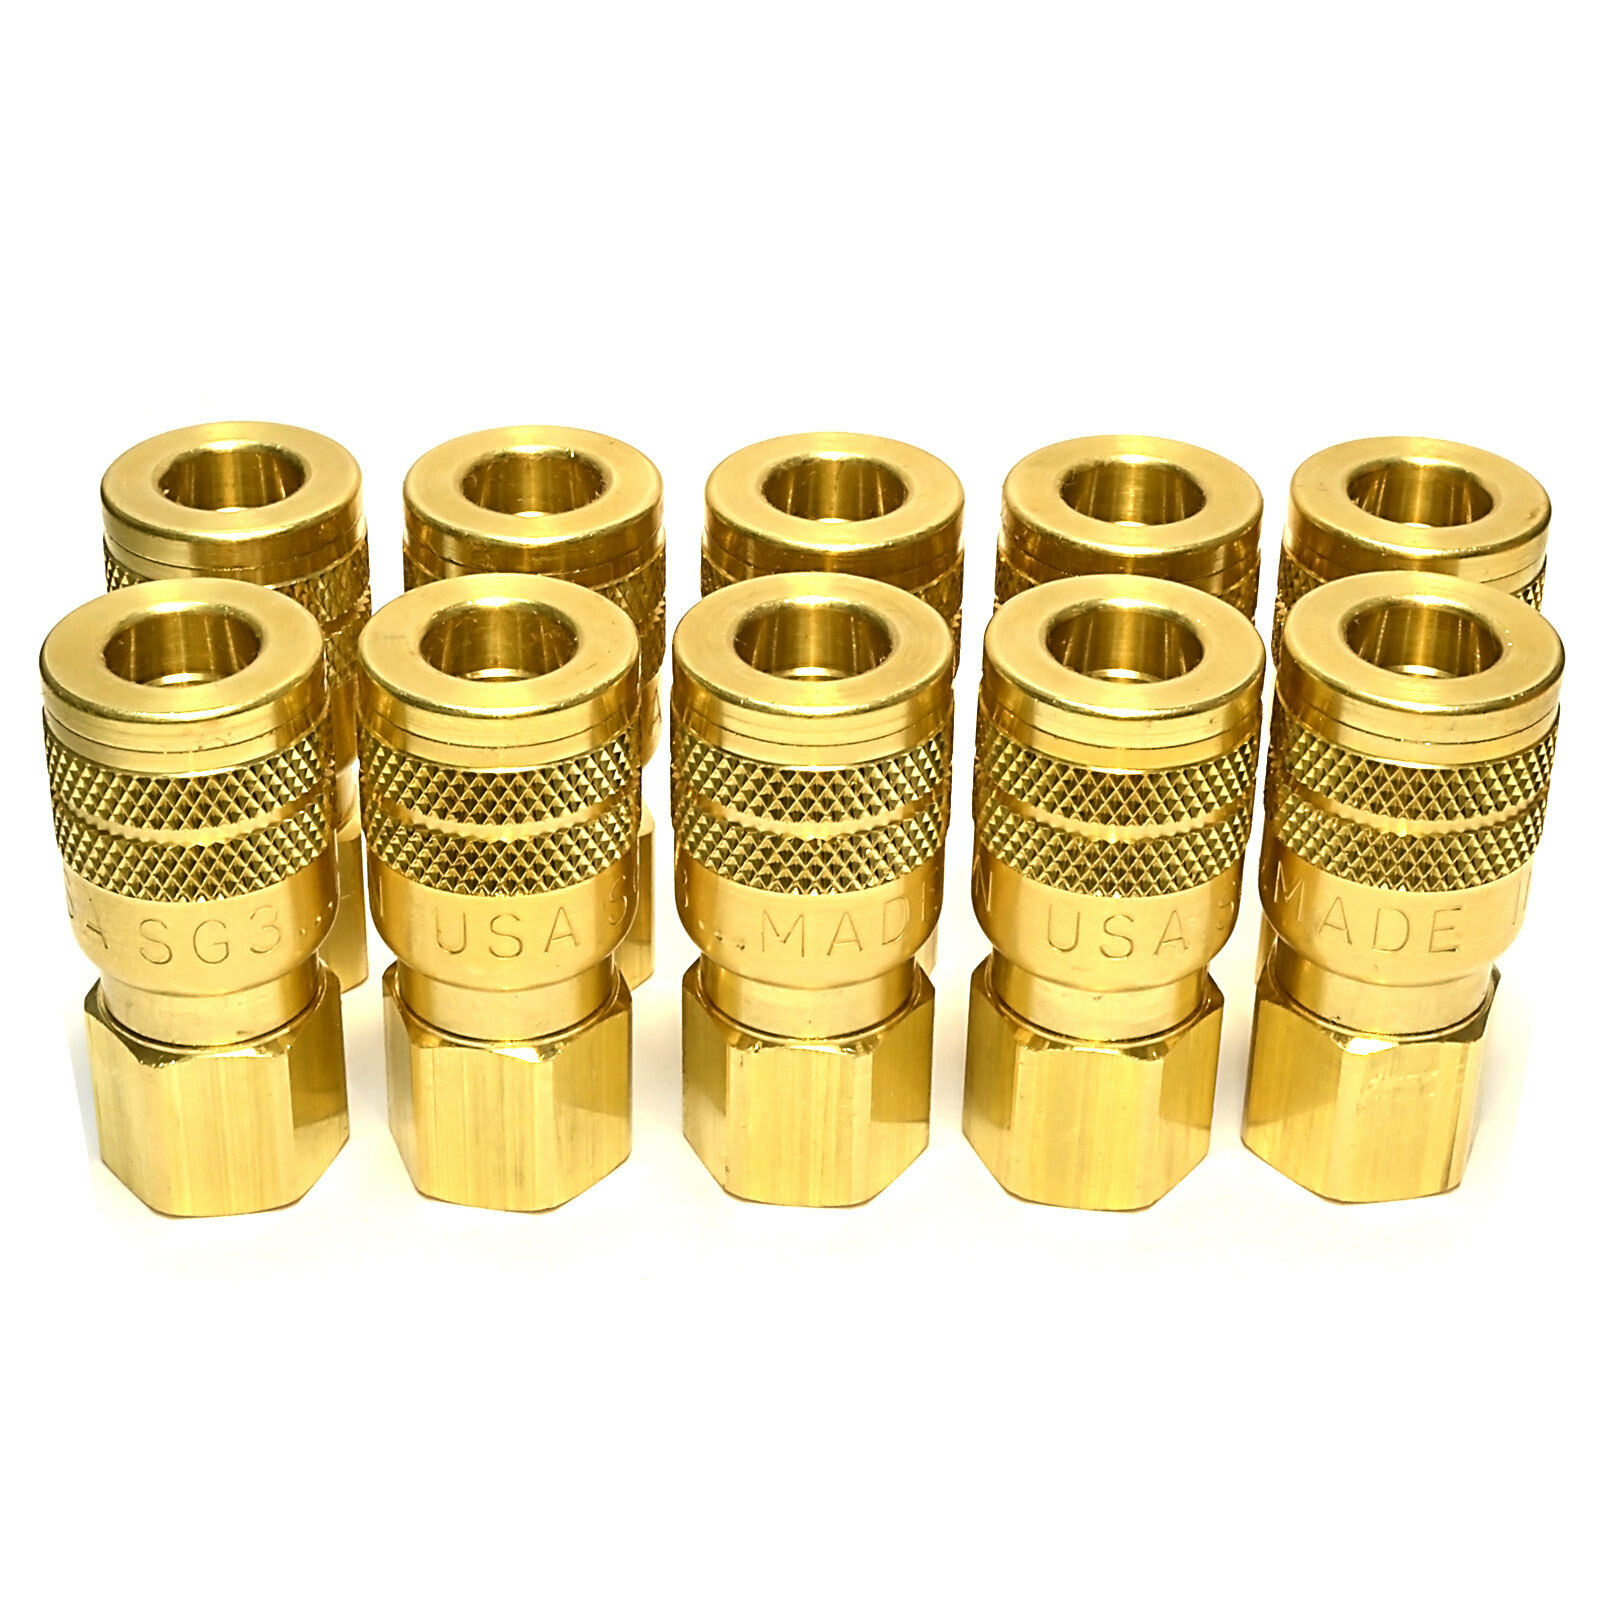 10 Foster Quick Connect 1/4" Female Npt Air Hose Coupler - M Style